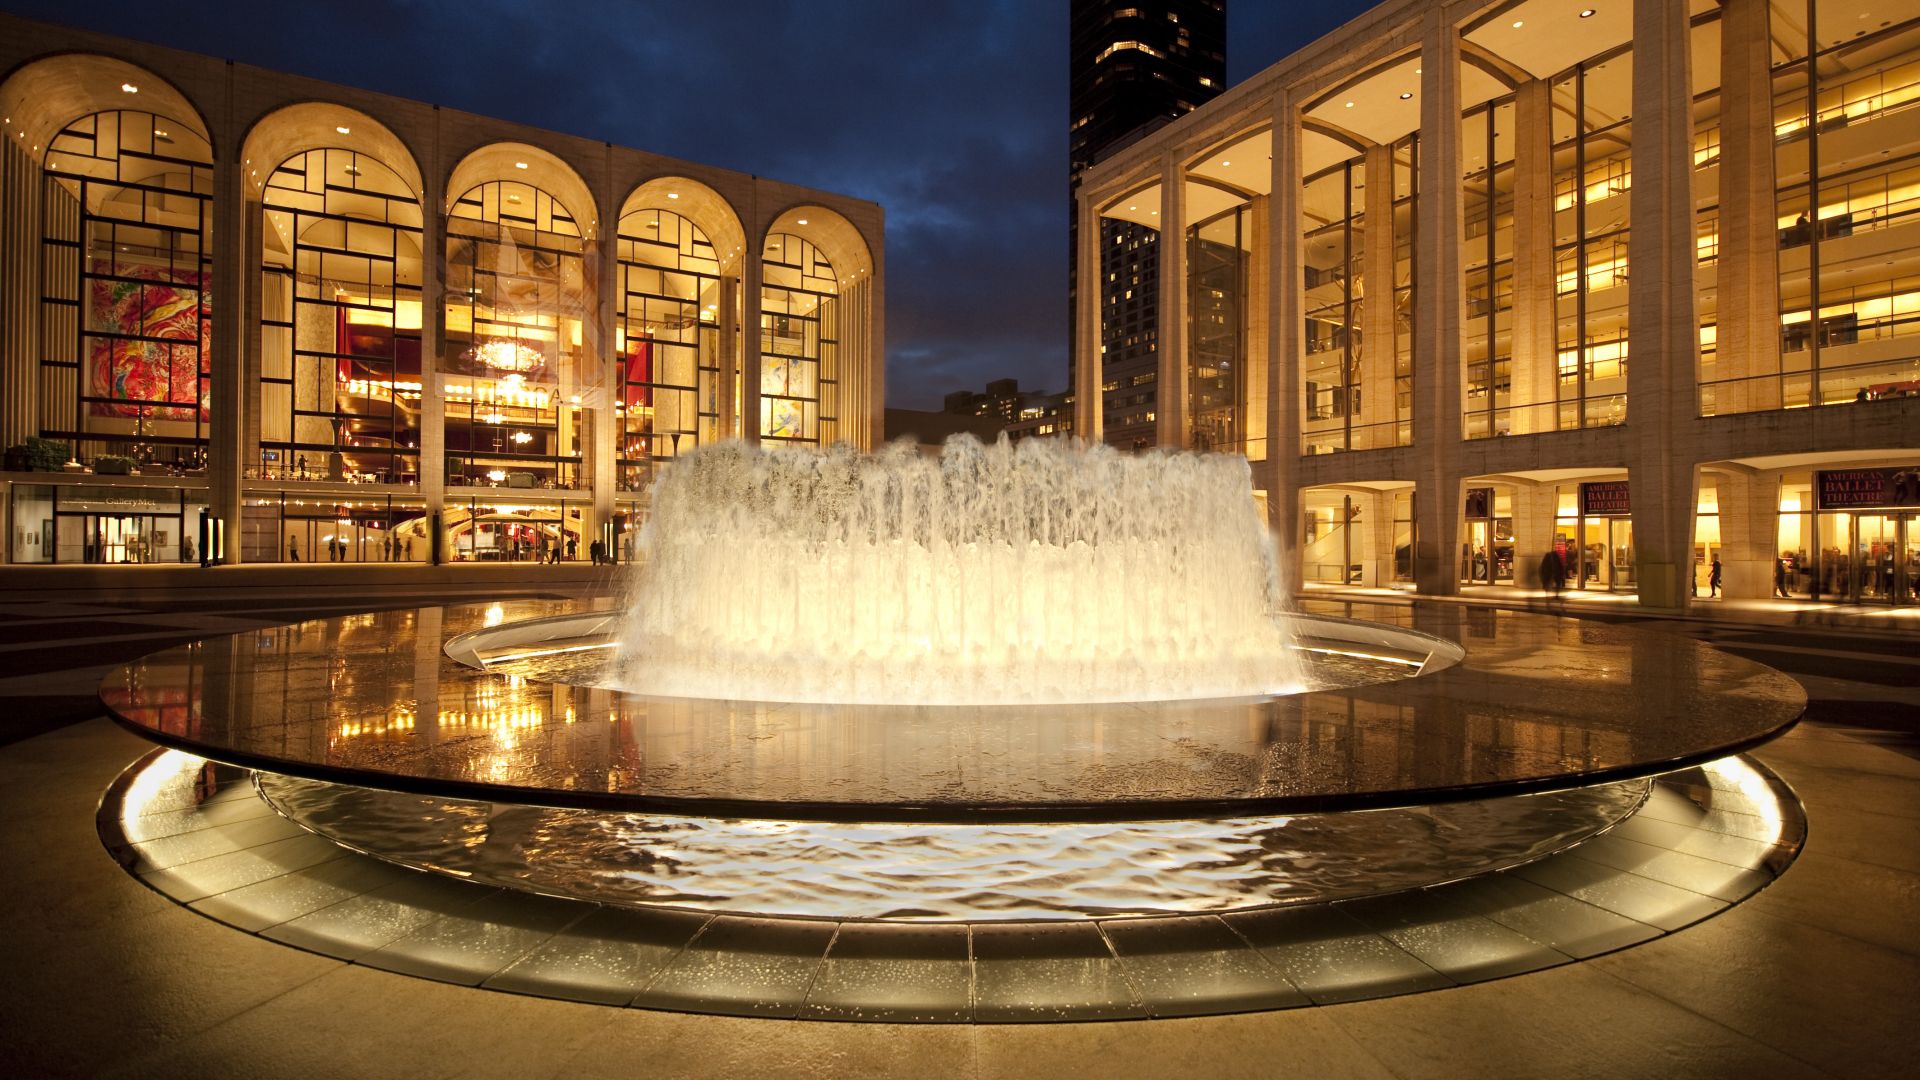 Lincoln Center for the Performing Arts, New York, NY, USA, tourism, travel, fountain (horizontal)